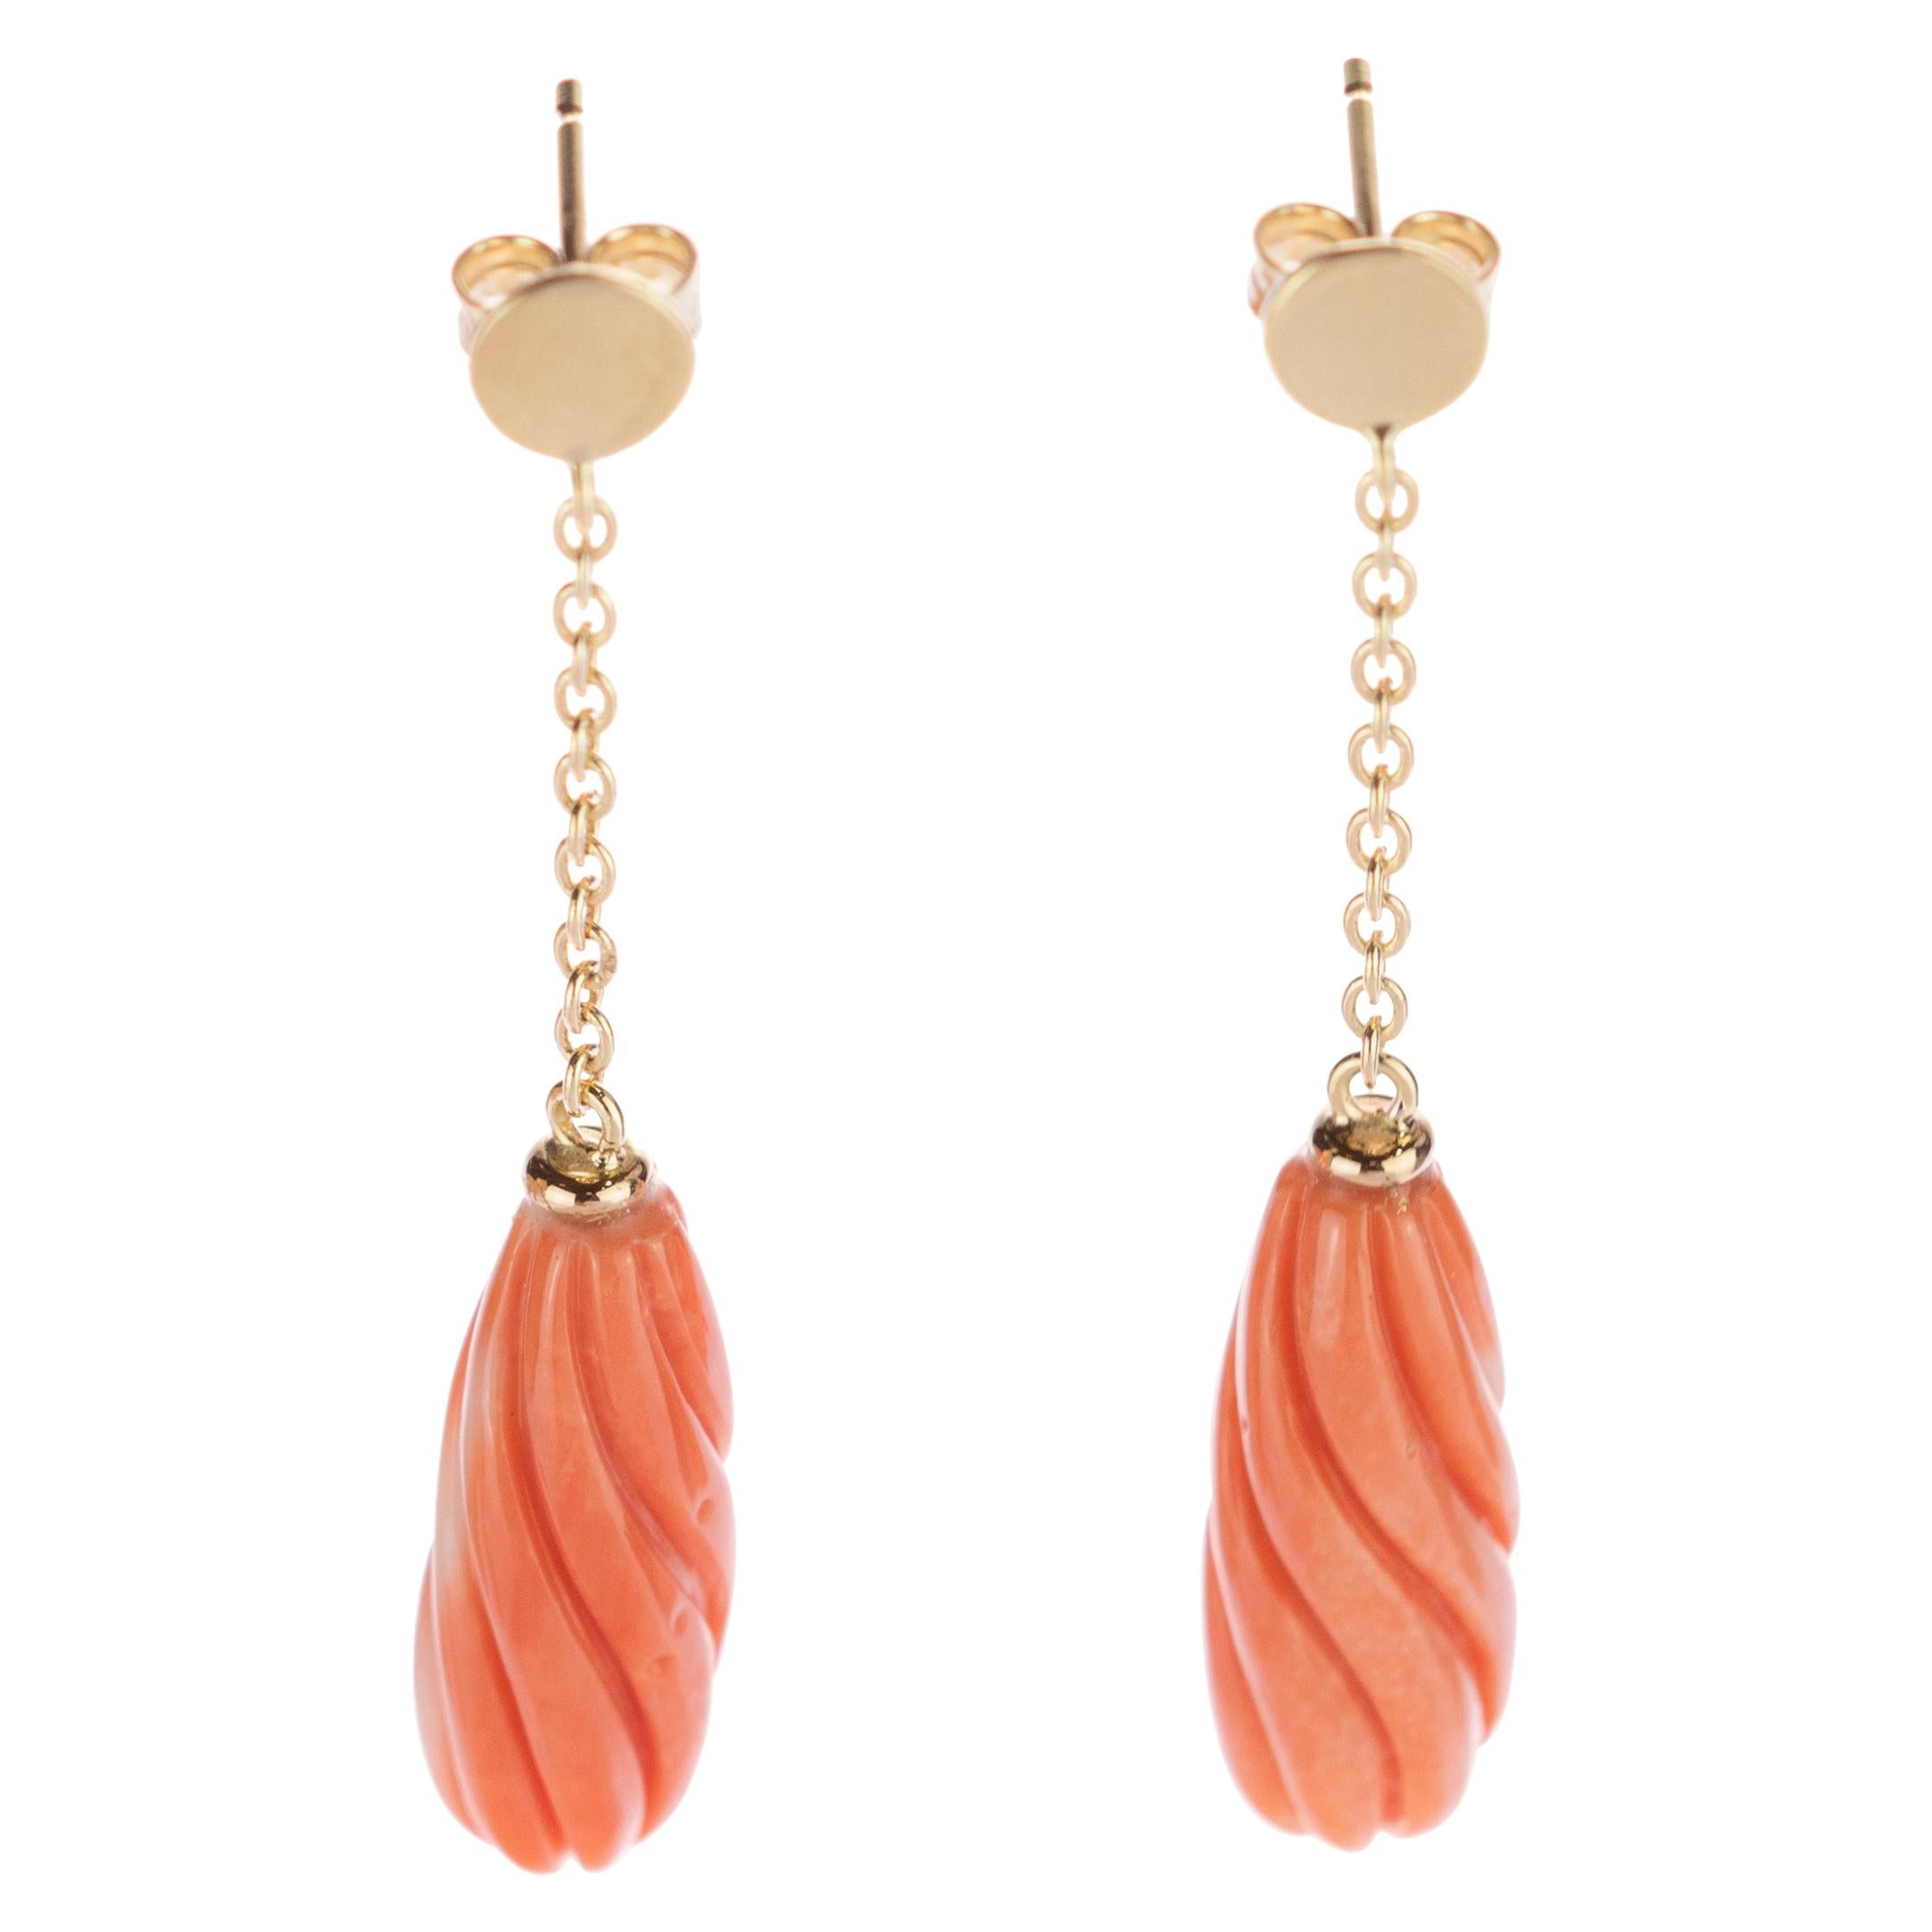 Salmon Natural Coral Spiral Carved Long Drop 18 Karat Gold Dangle Sea Earrings For Sale